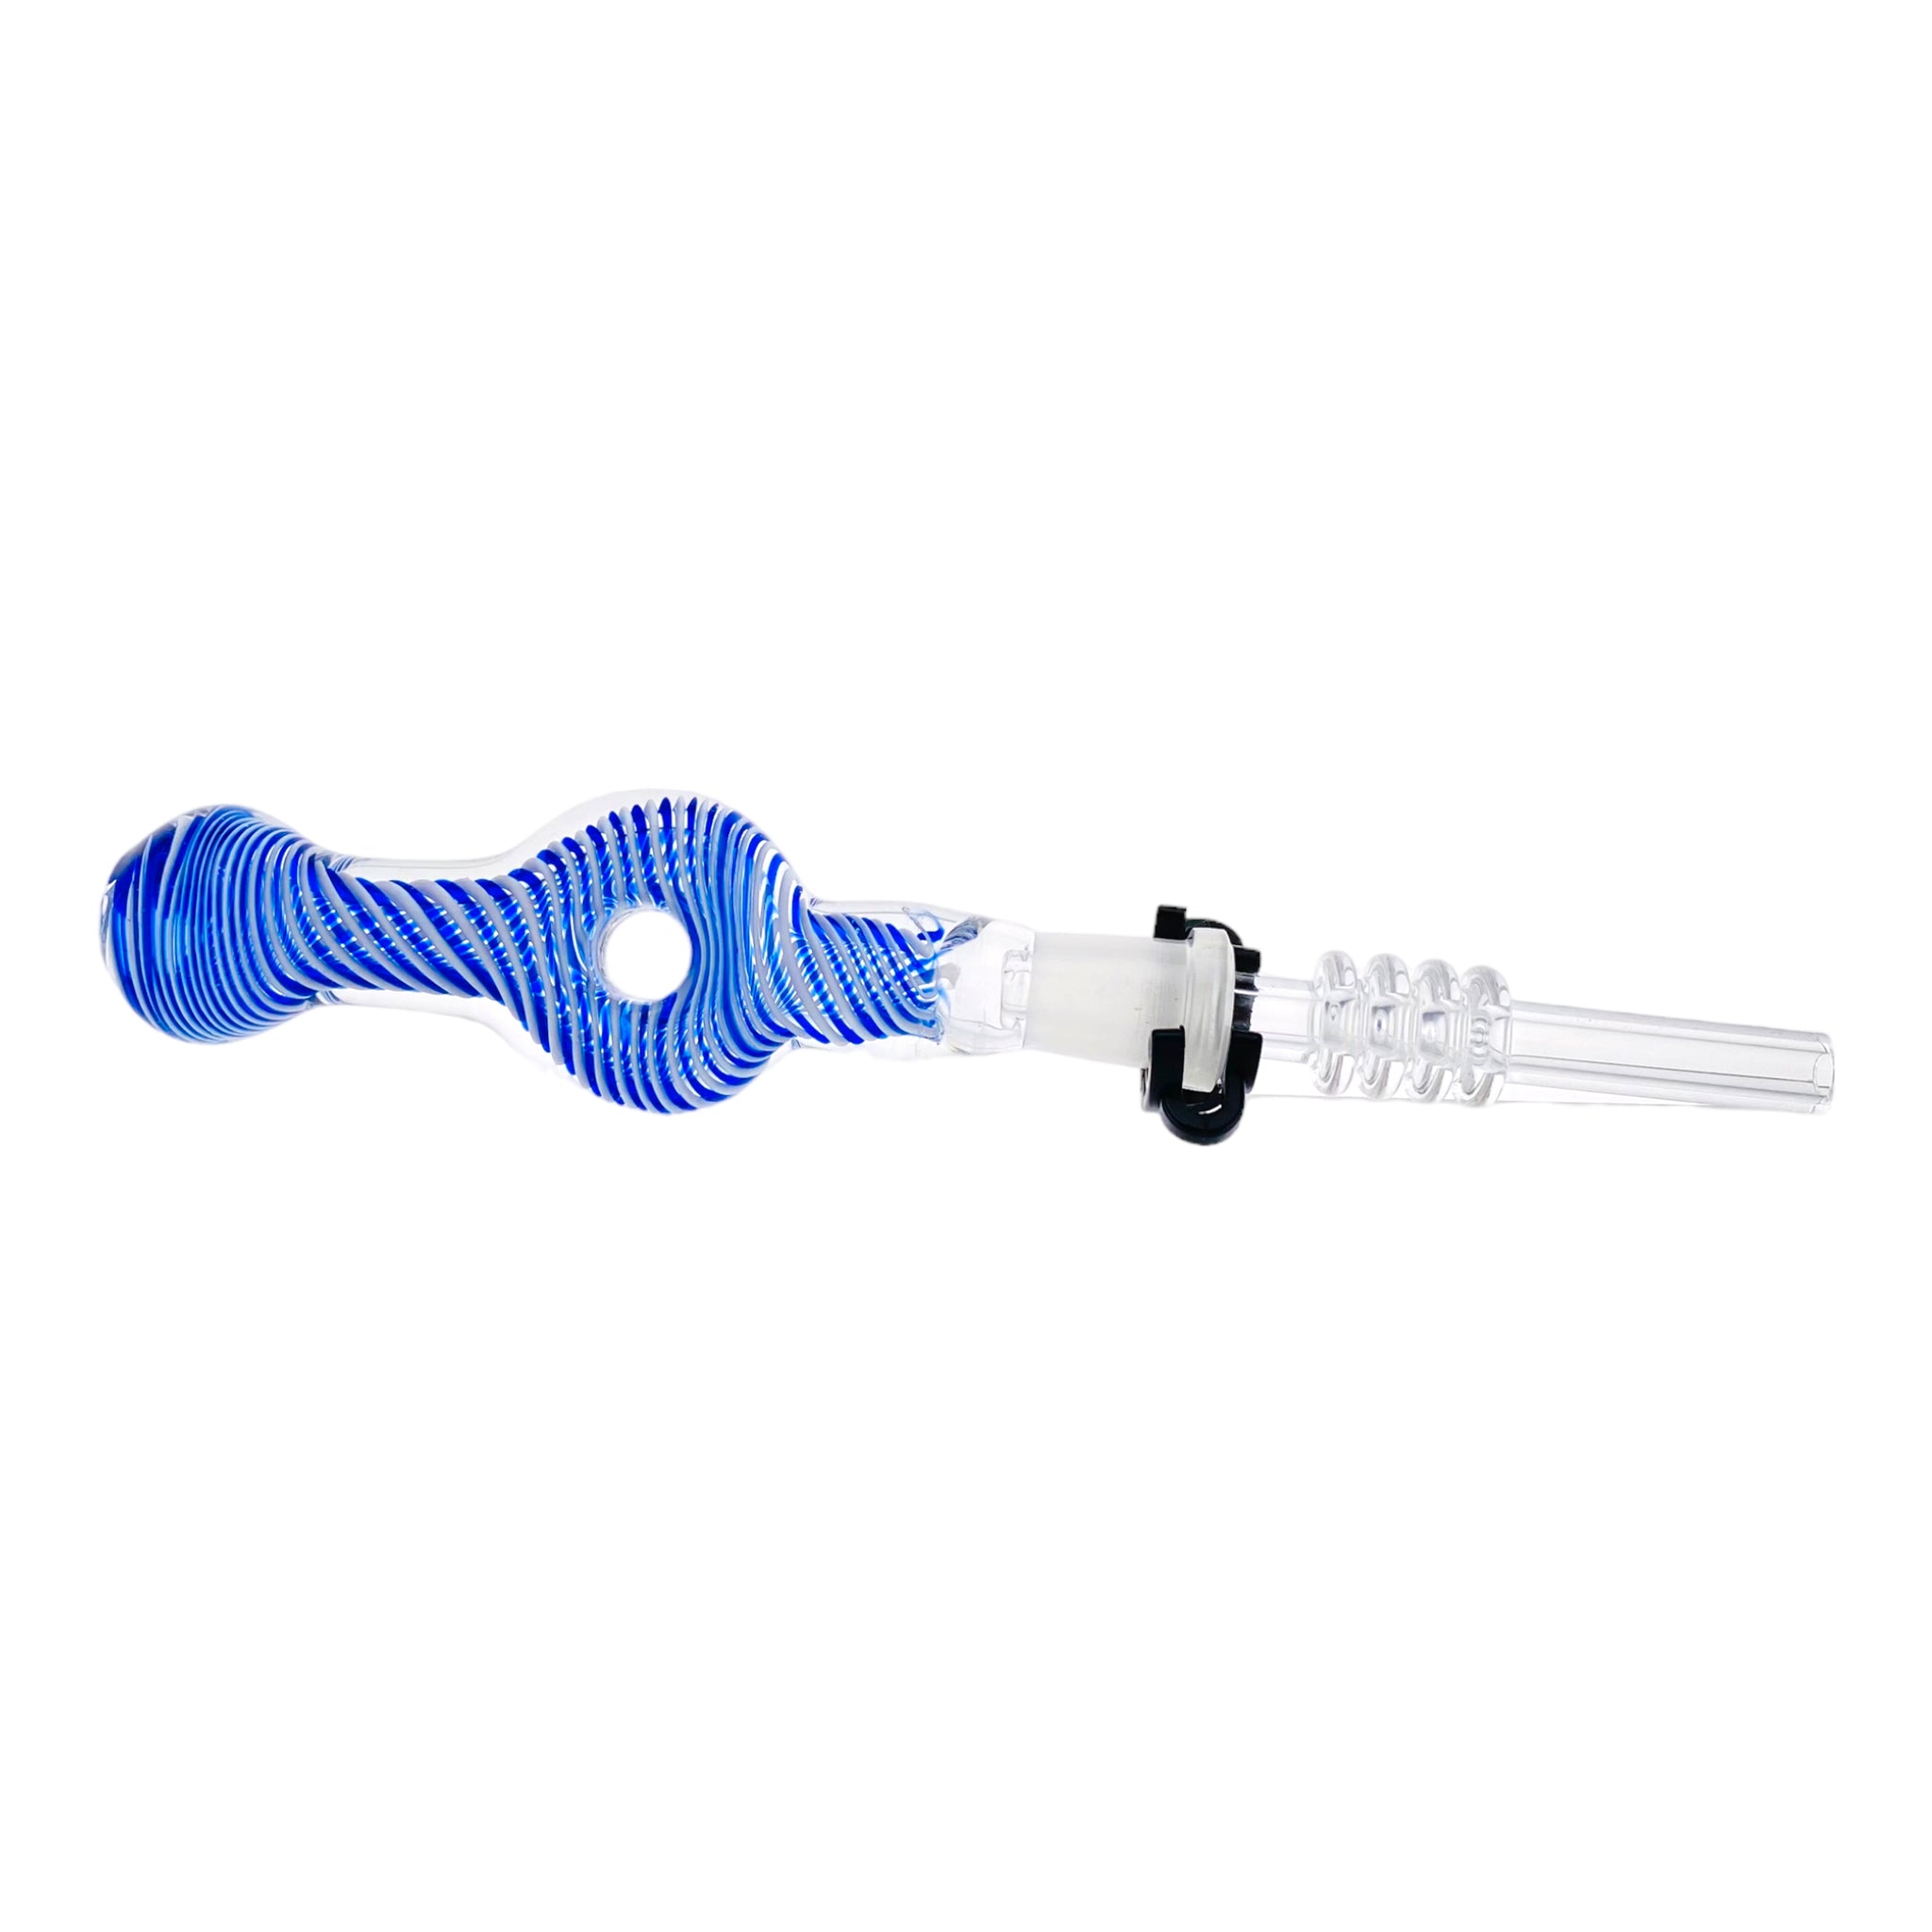 10mm Nectar Collector - Blue And White Inside Out Spiral Donut With Quartz Tip